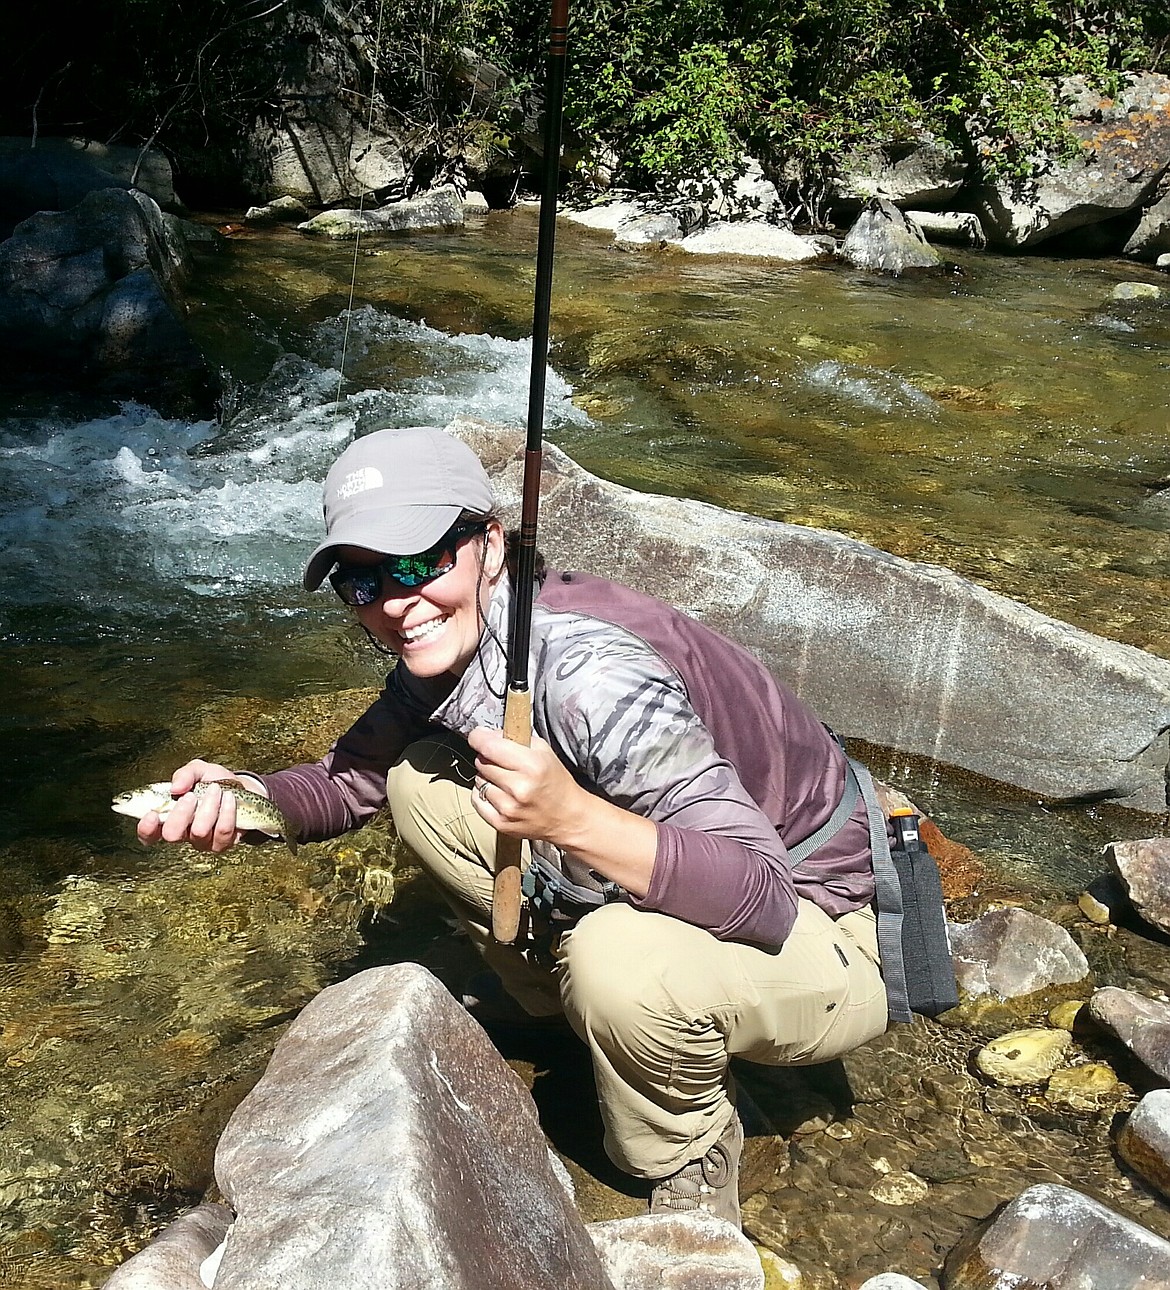 Lindsey out enjoying one of her many hobbies, fly fishing and enjoying the outdoors.